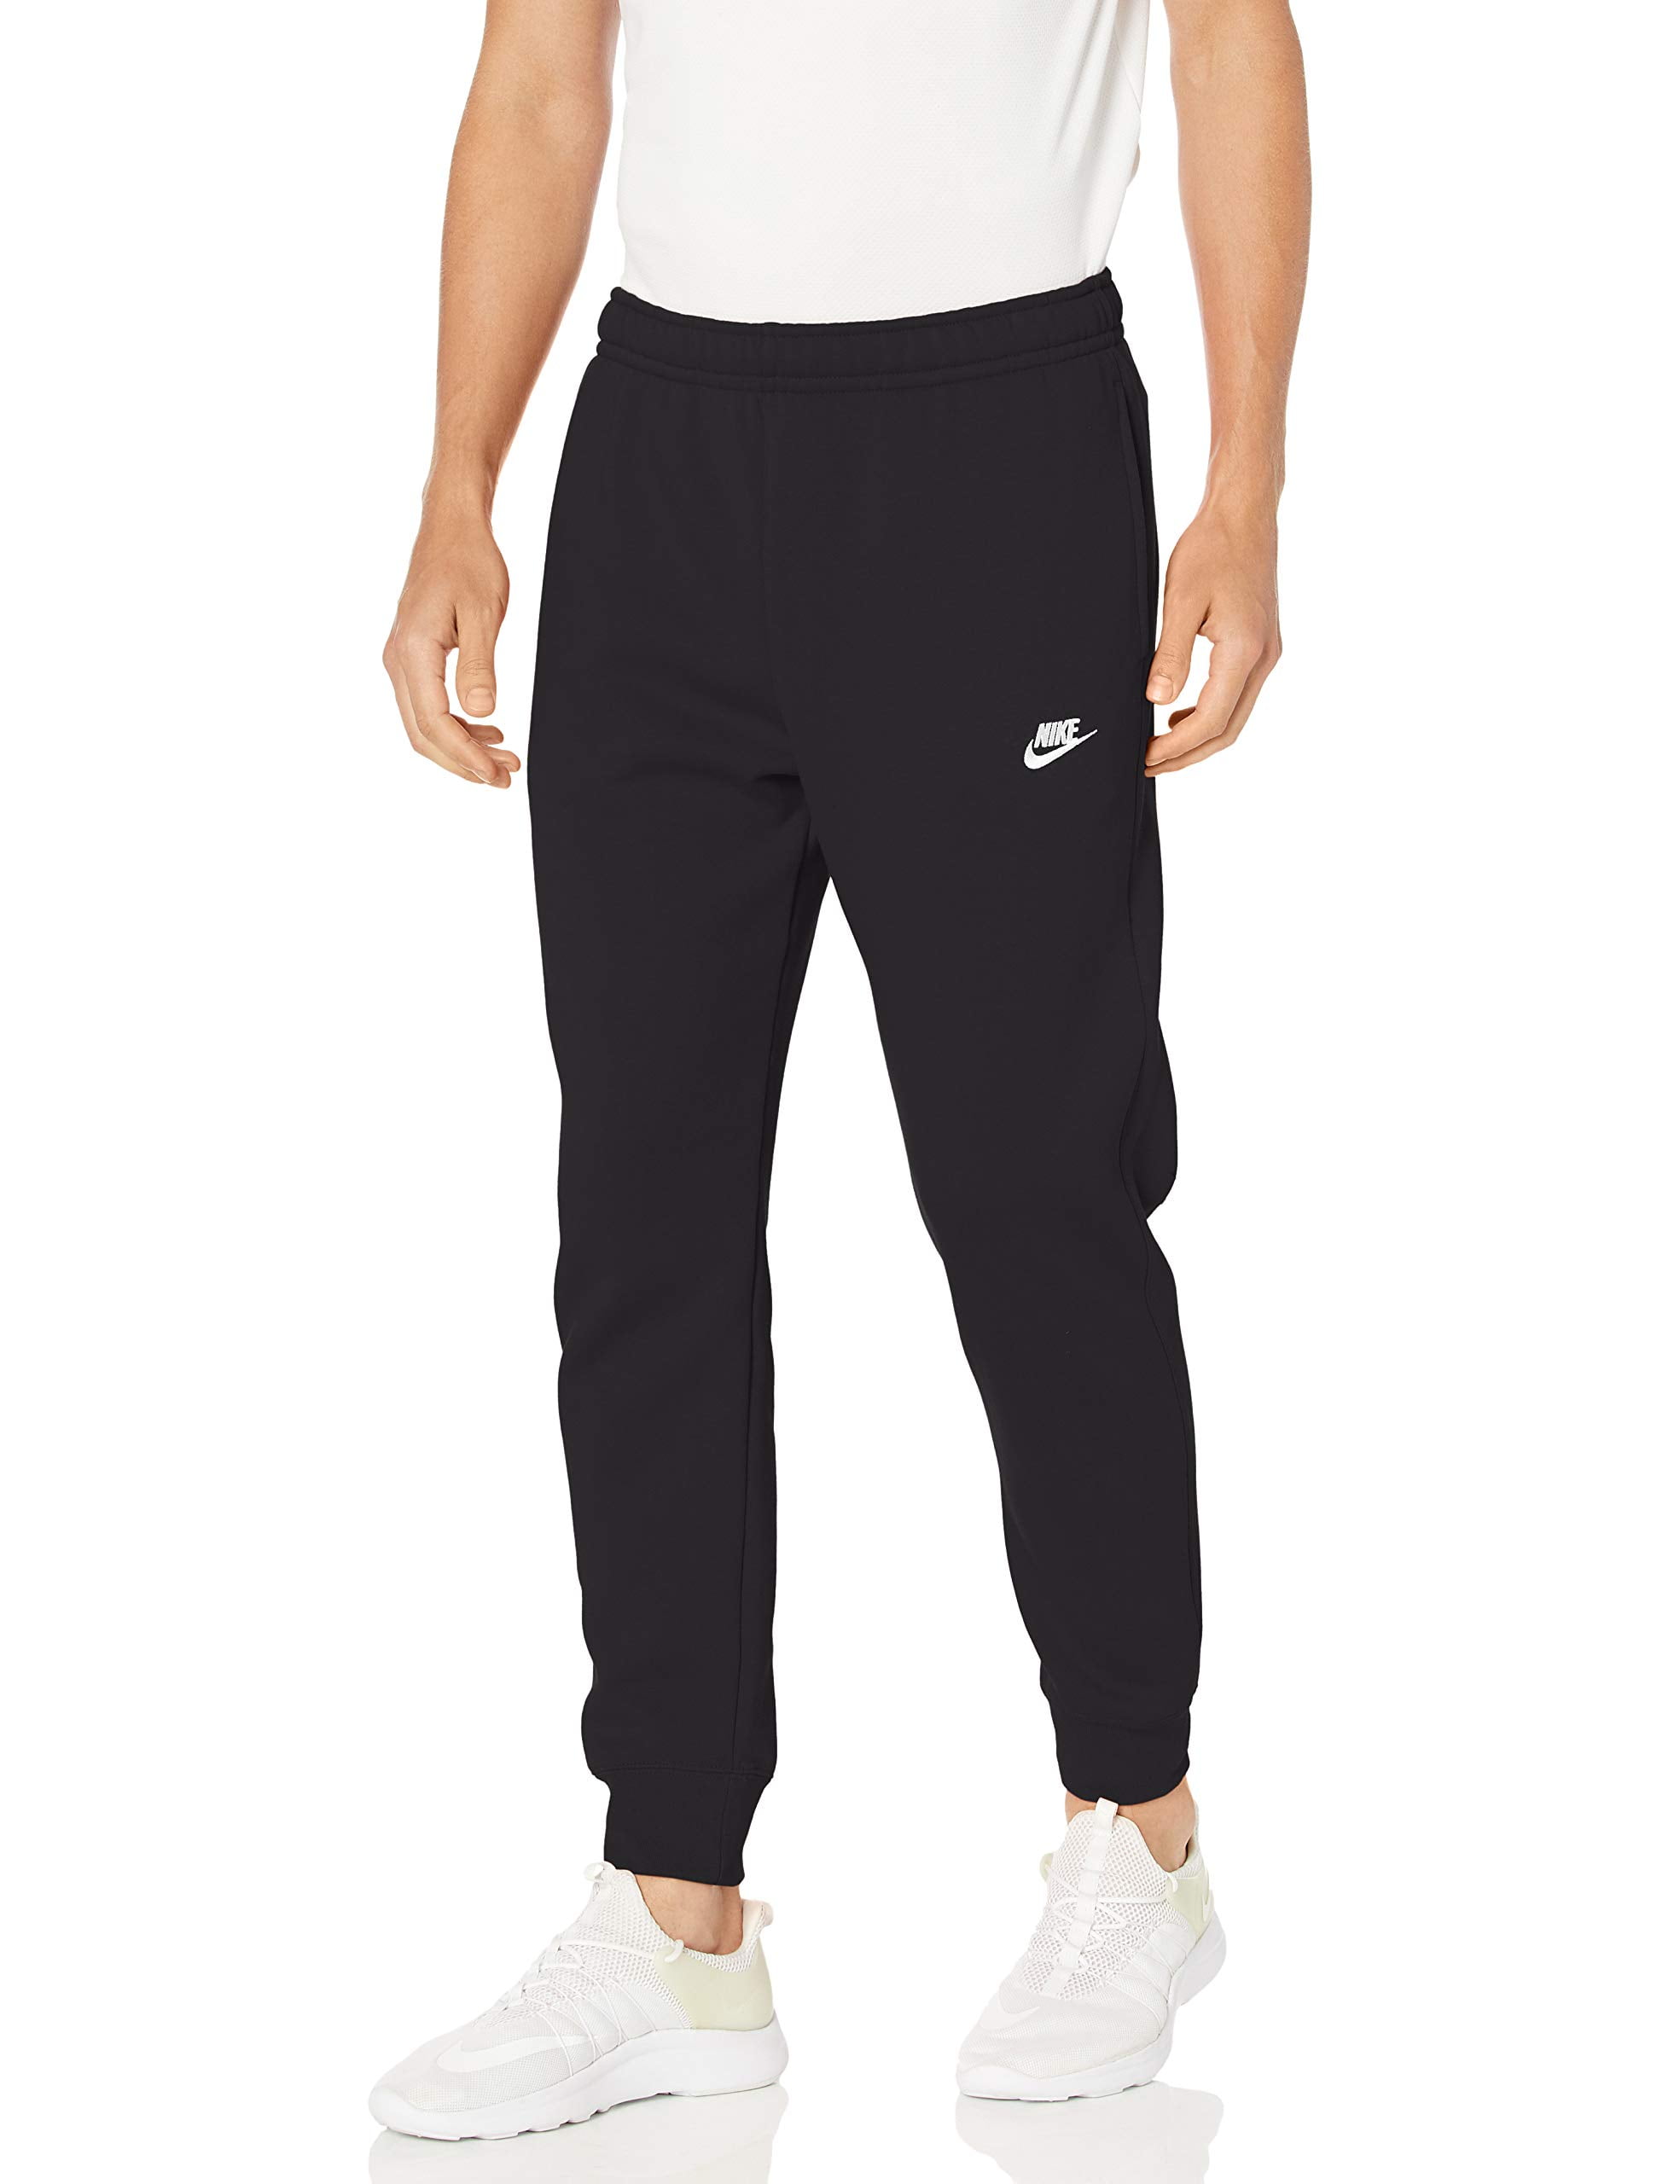 The BEST NIKE Joggers To Buy In 2022  Men's Nike Joggers Try-On Haul  (Sizing, Price & Comfort) 